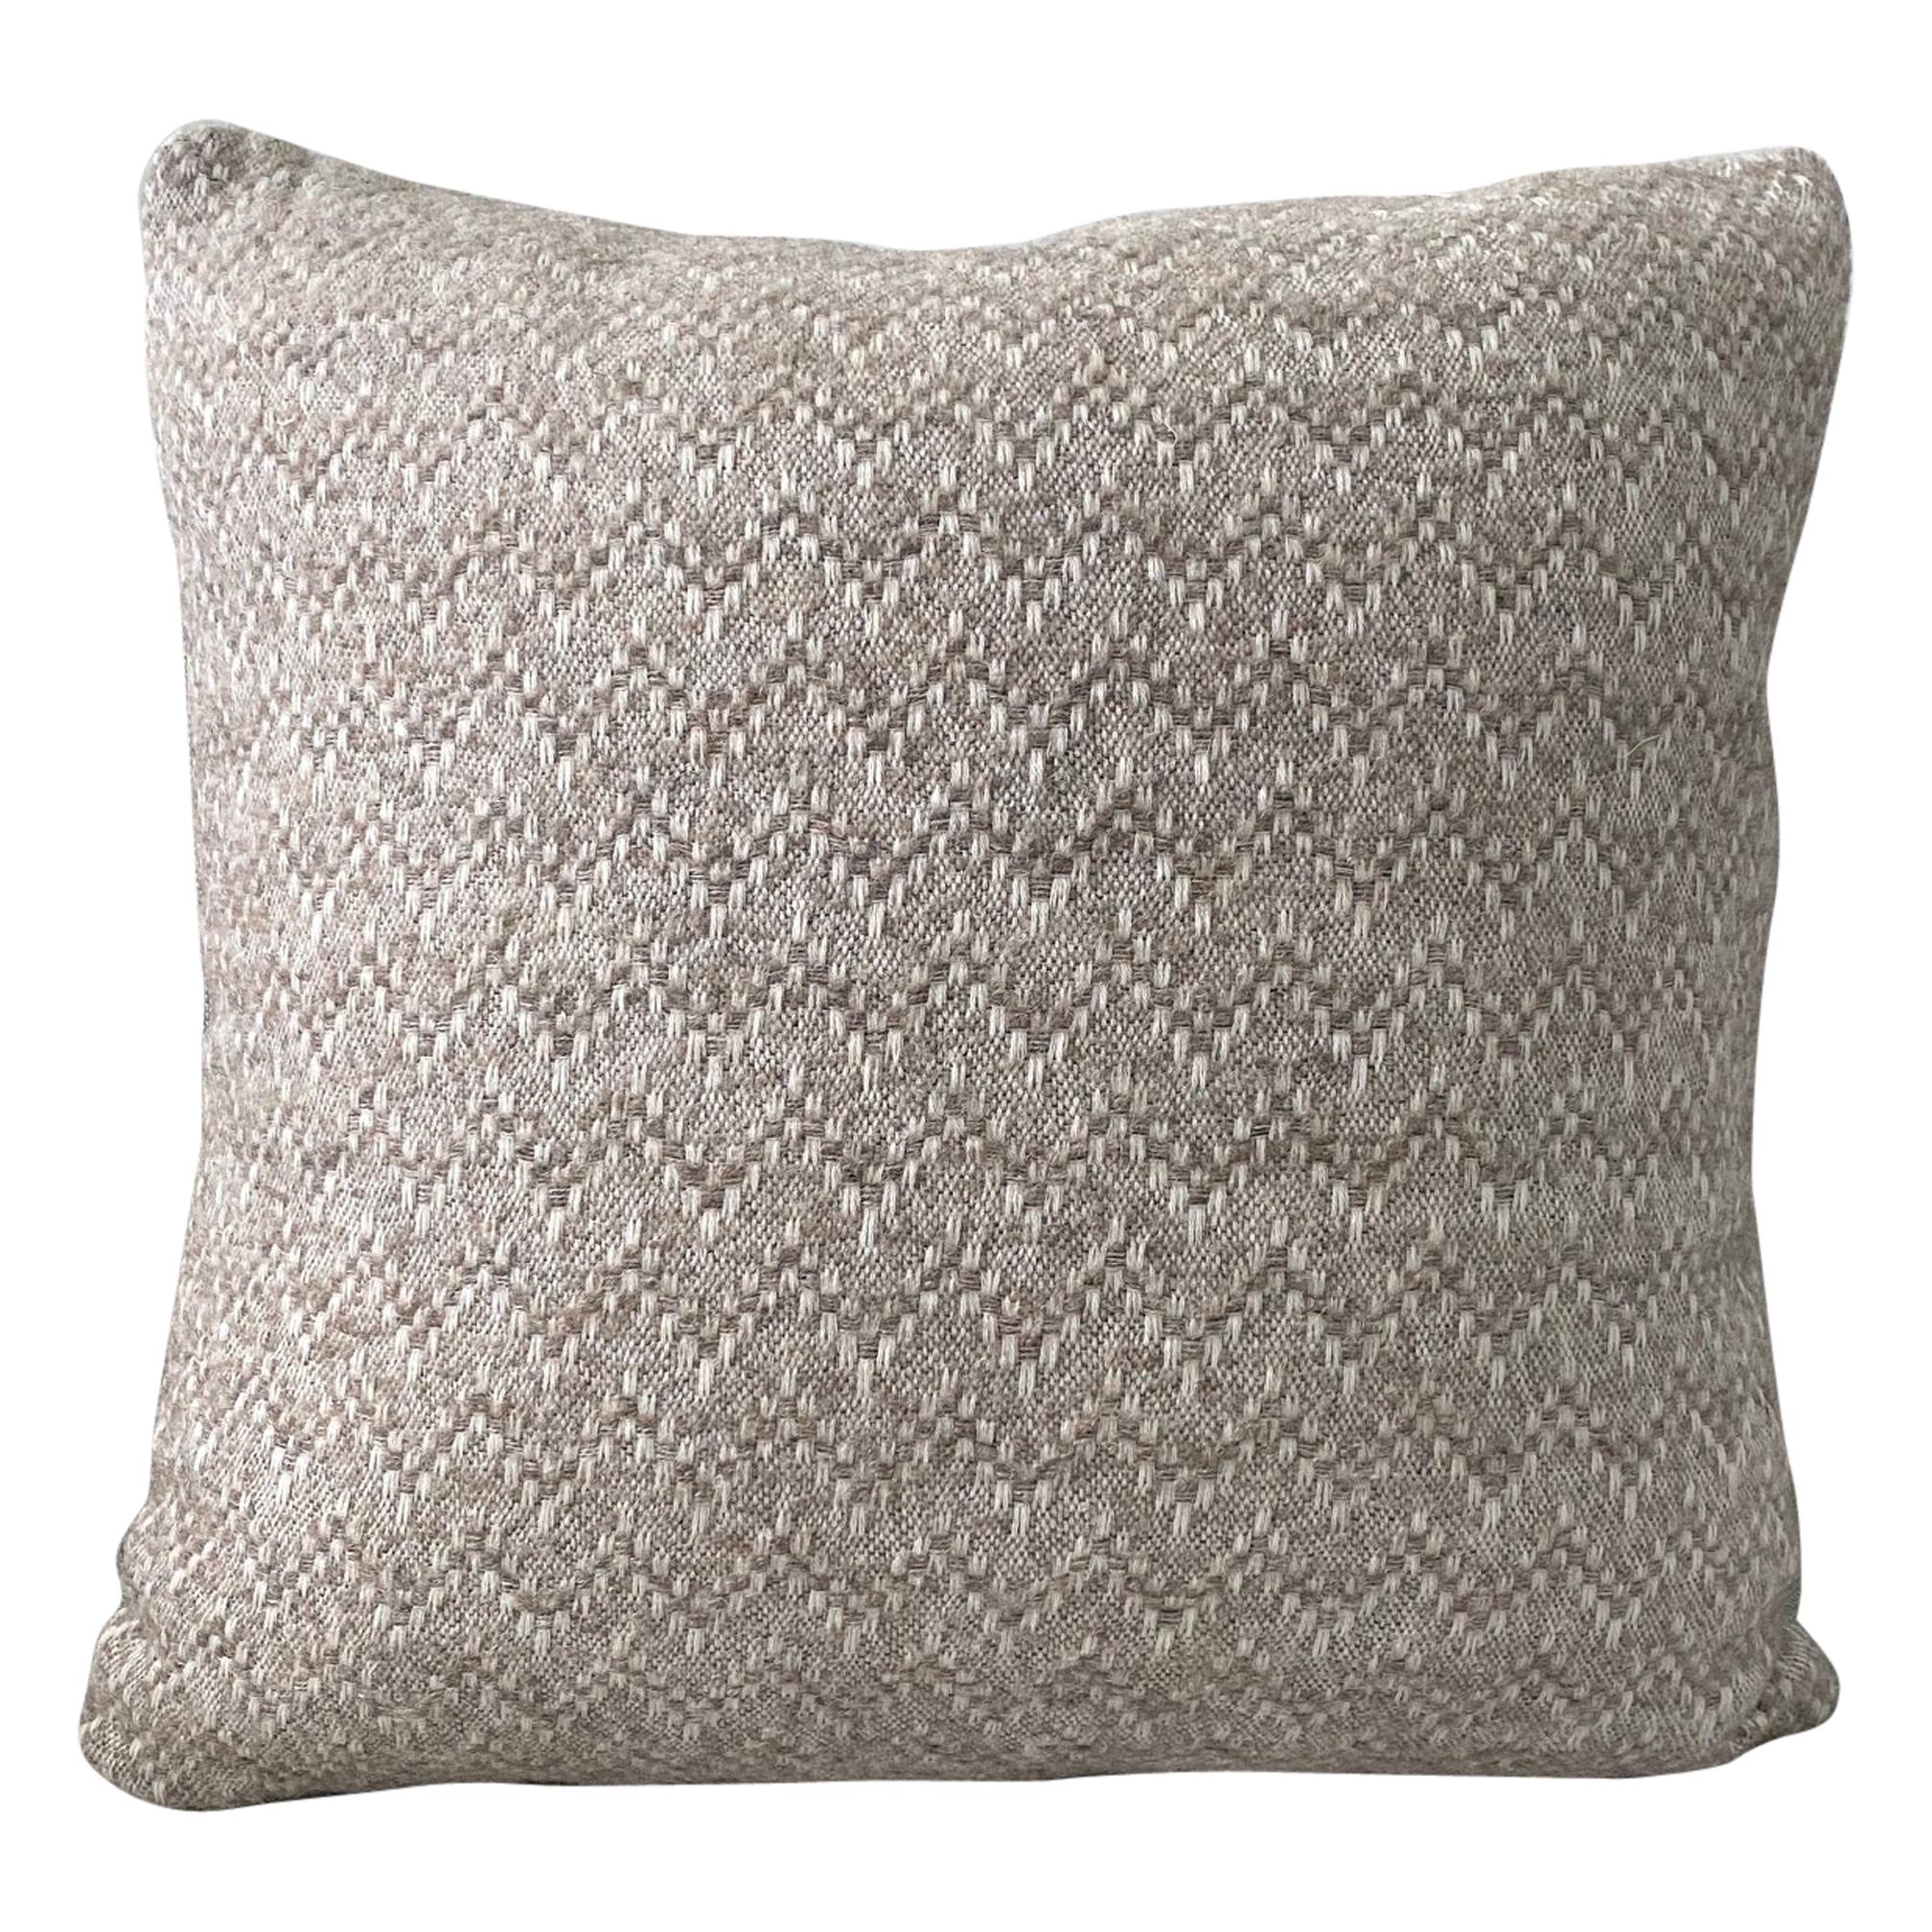 Pierre Frey Organic Wool, Alpaca, and Mohair Chevron Luxe Pillow in Taupe